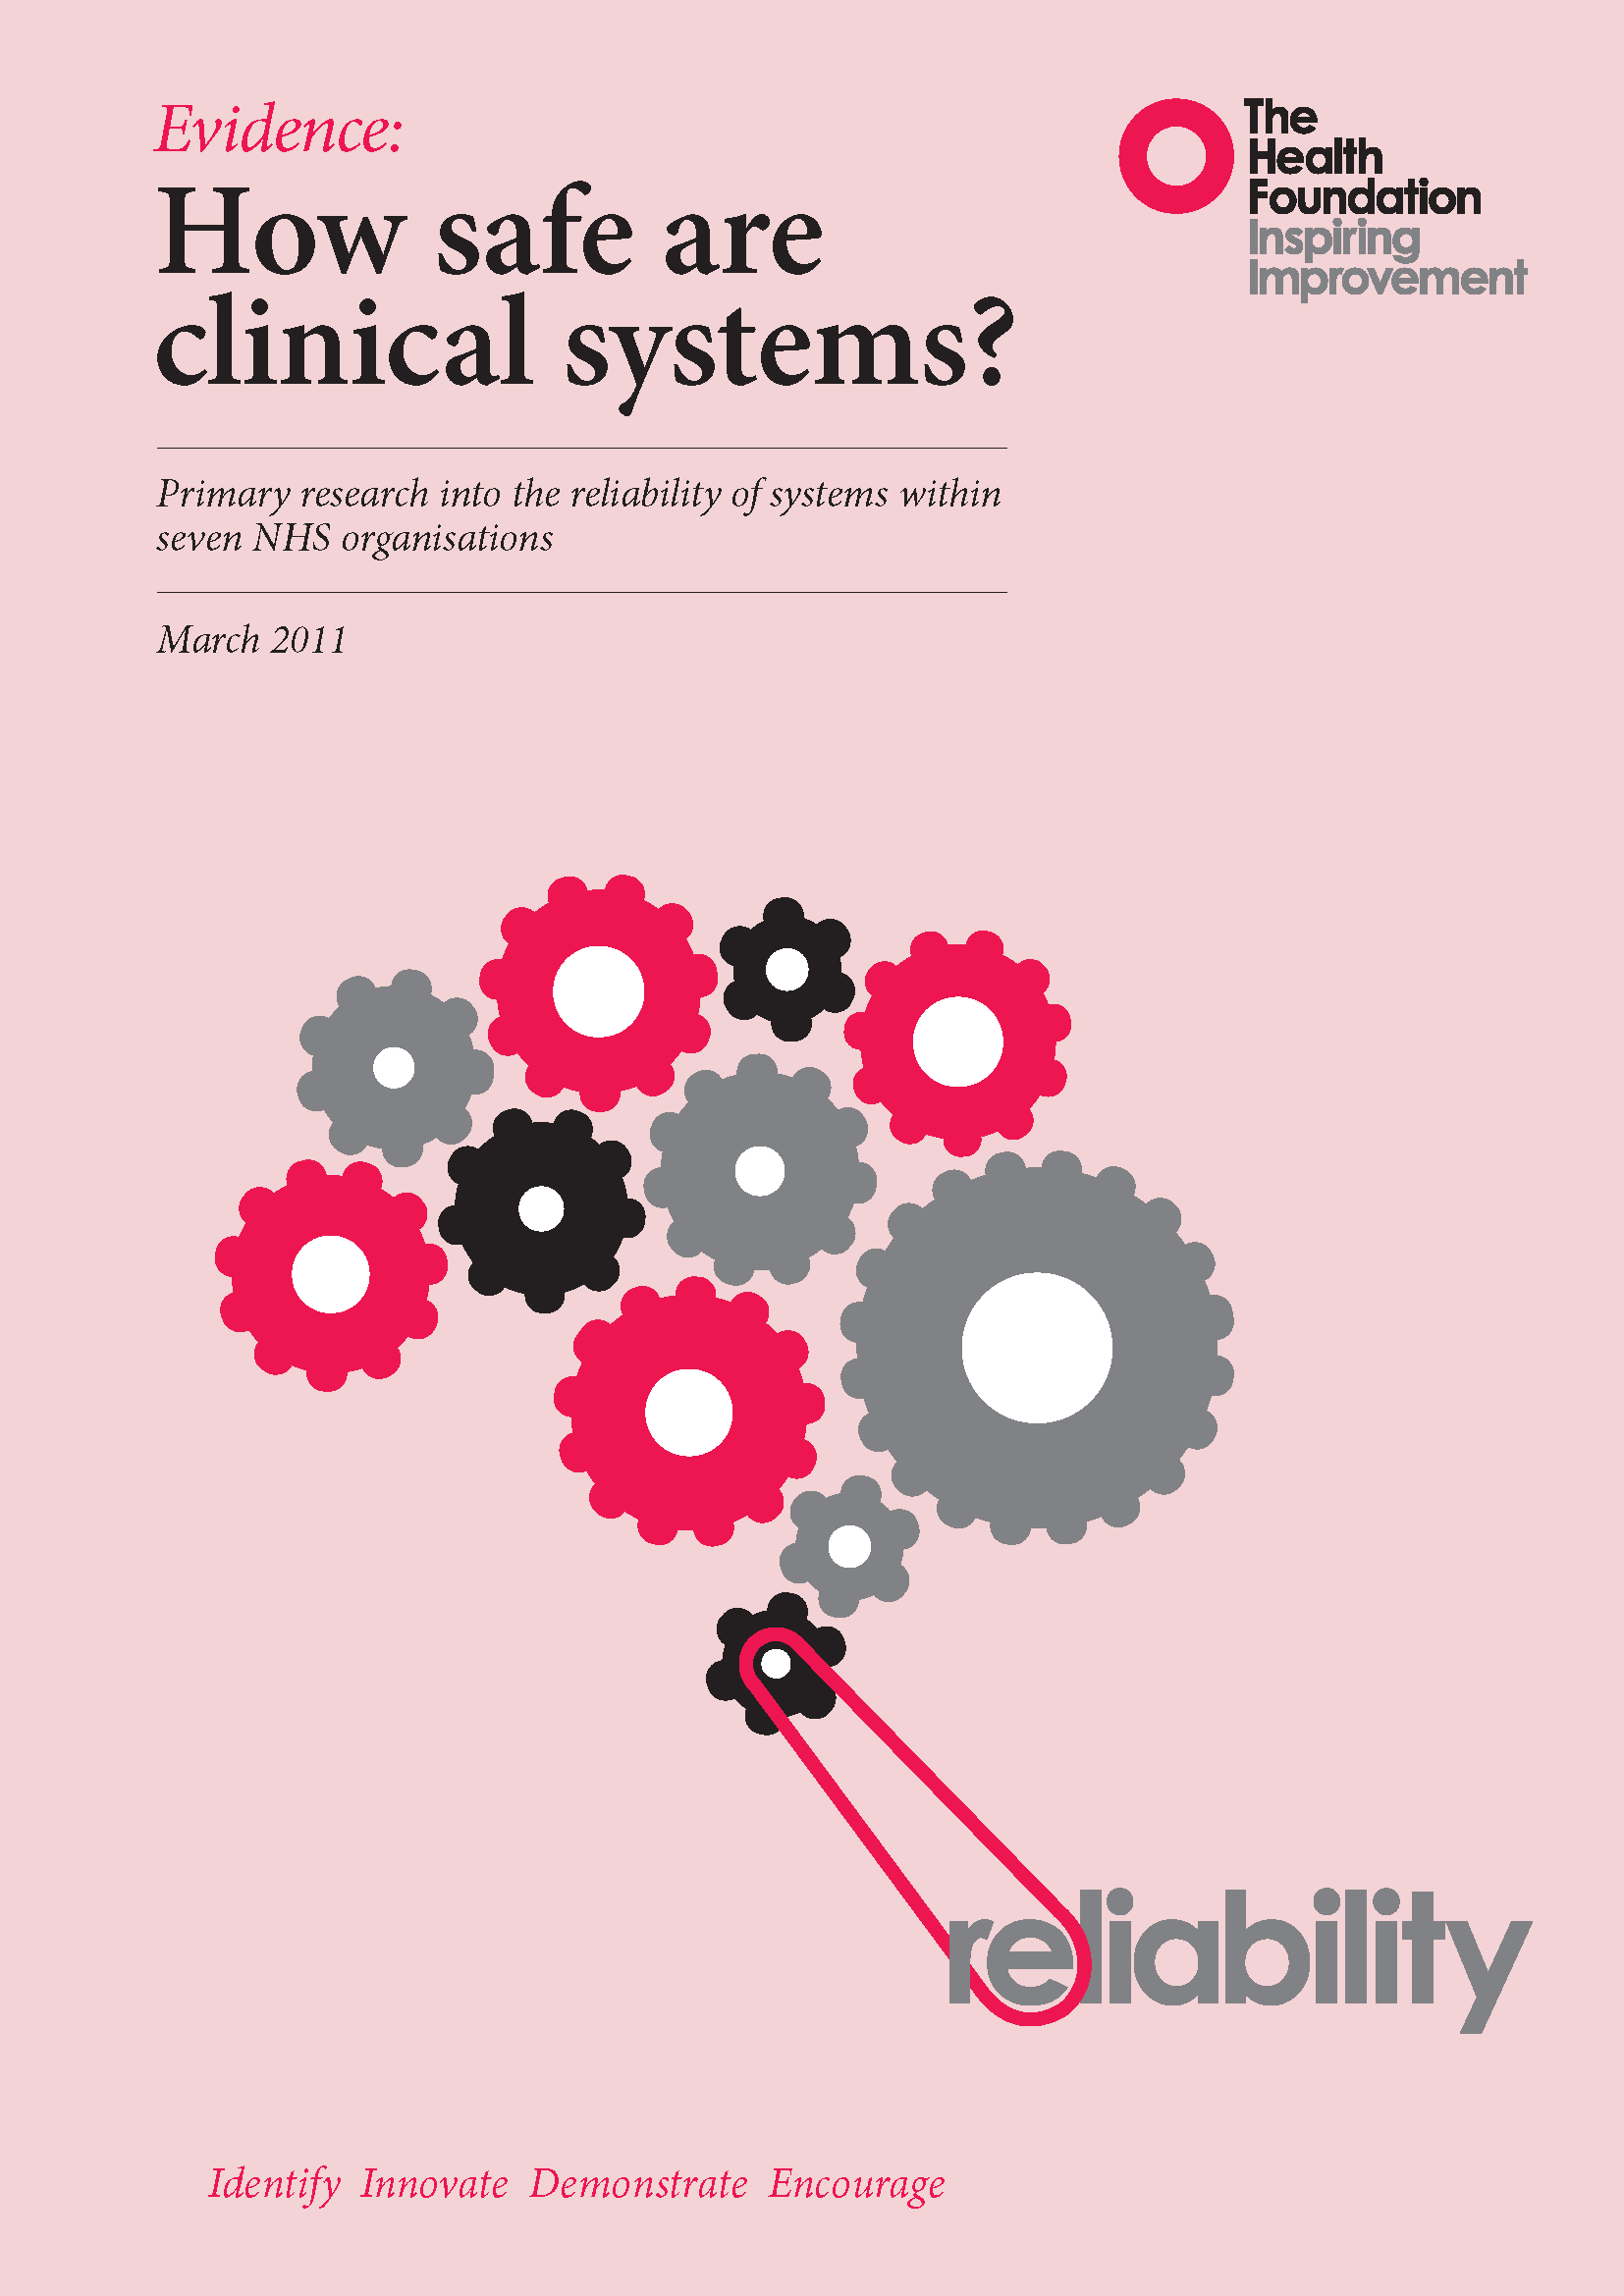 Evidence: How safe are clinical systems? - The Health Foundation